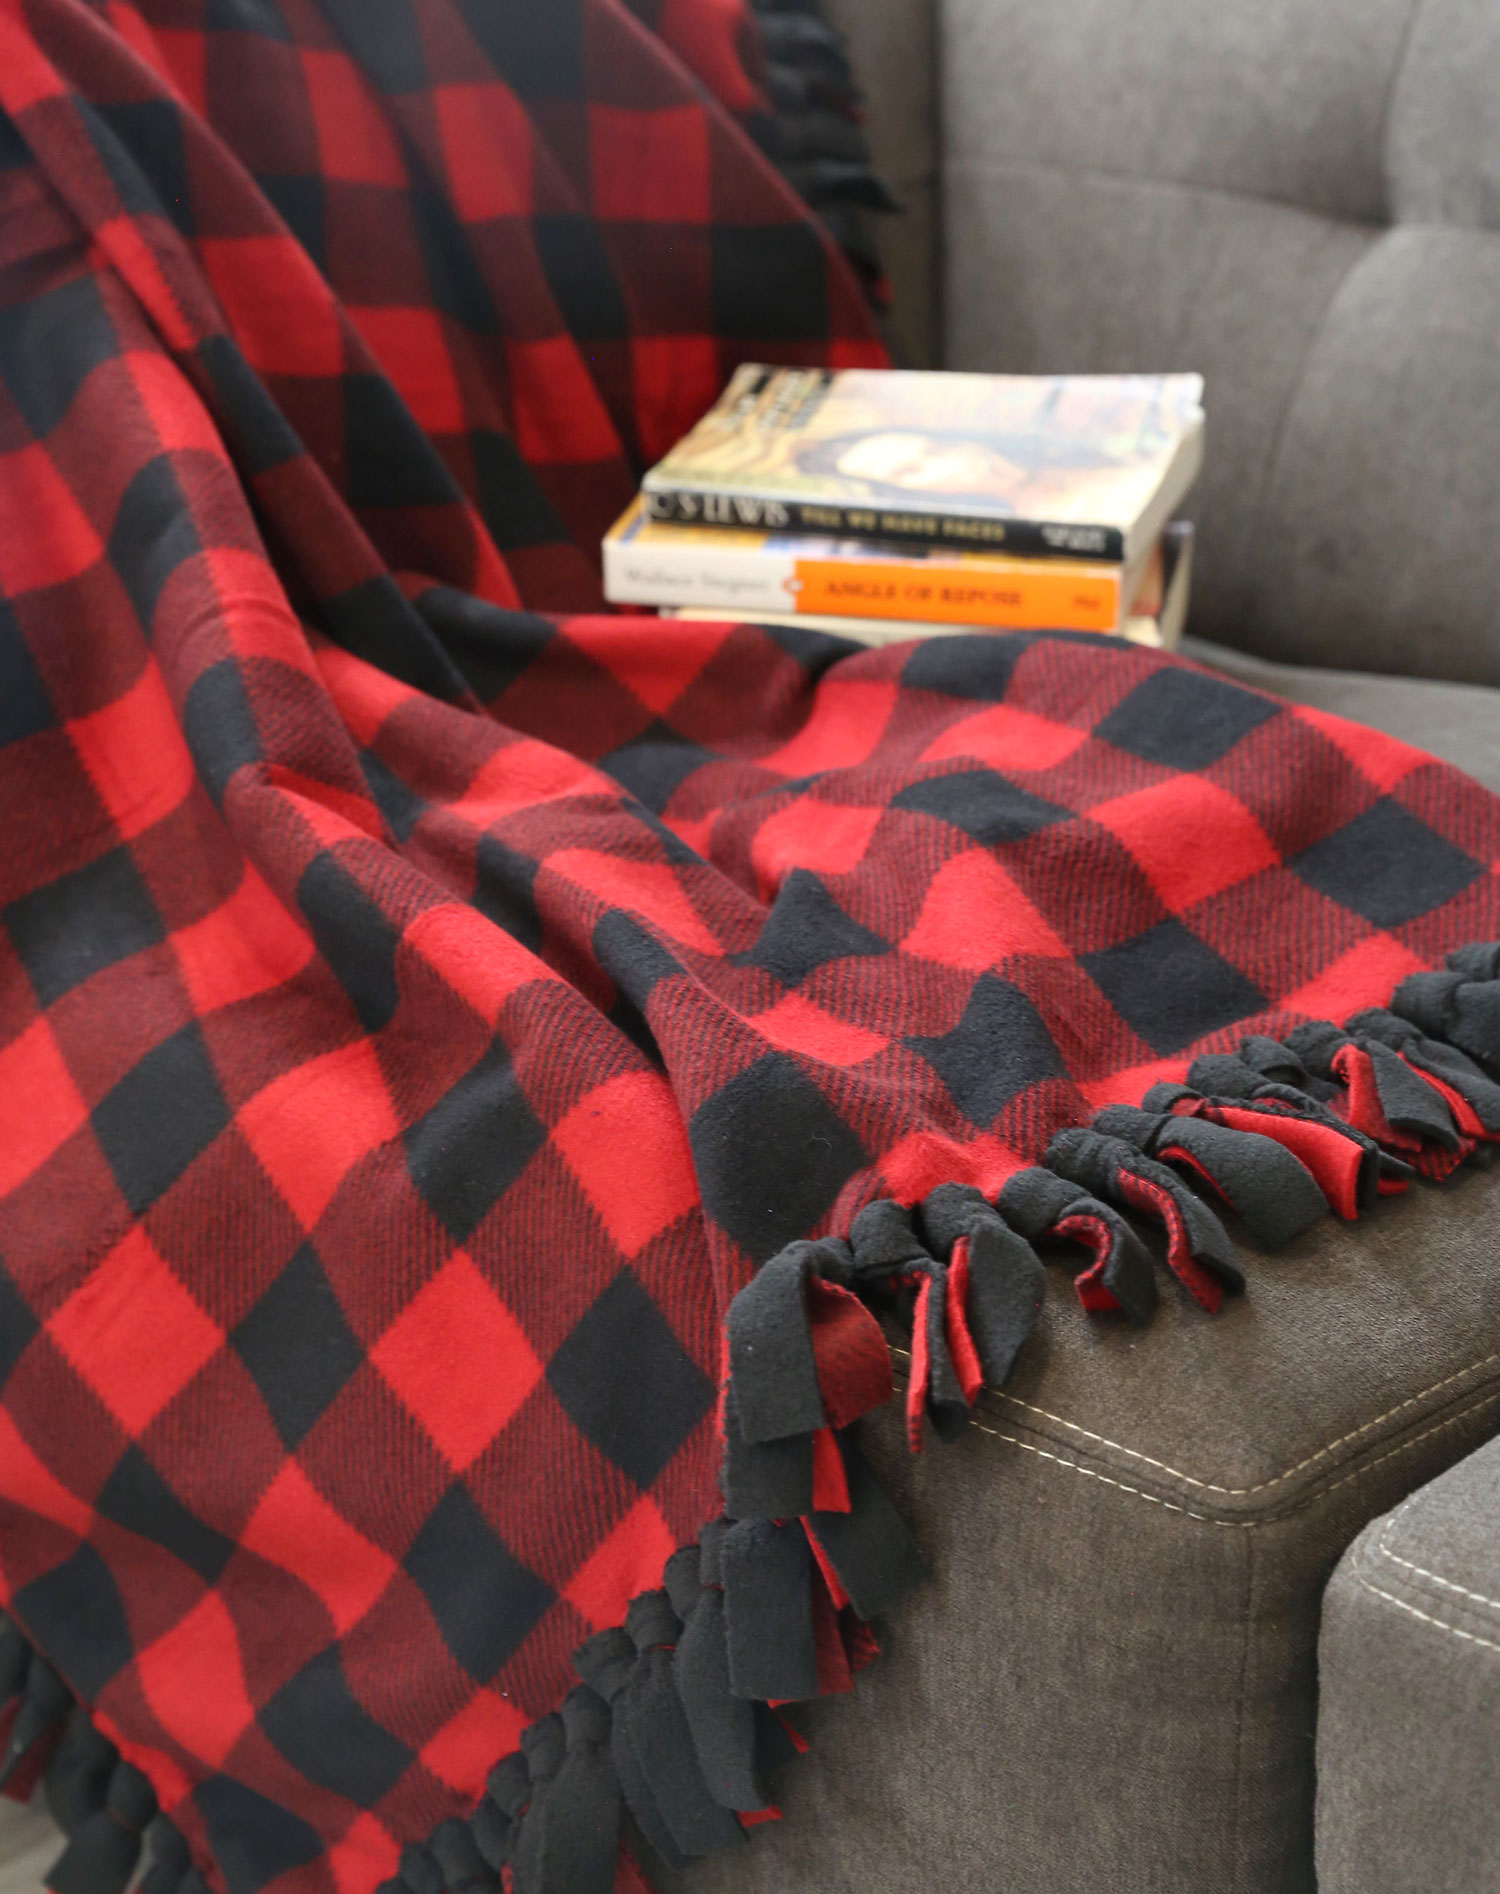 Fleece blanket on a couch with books